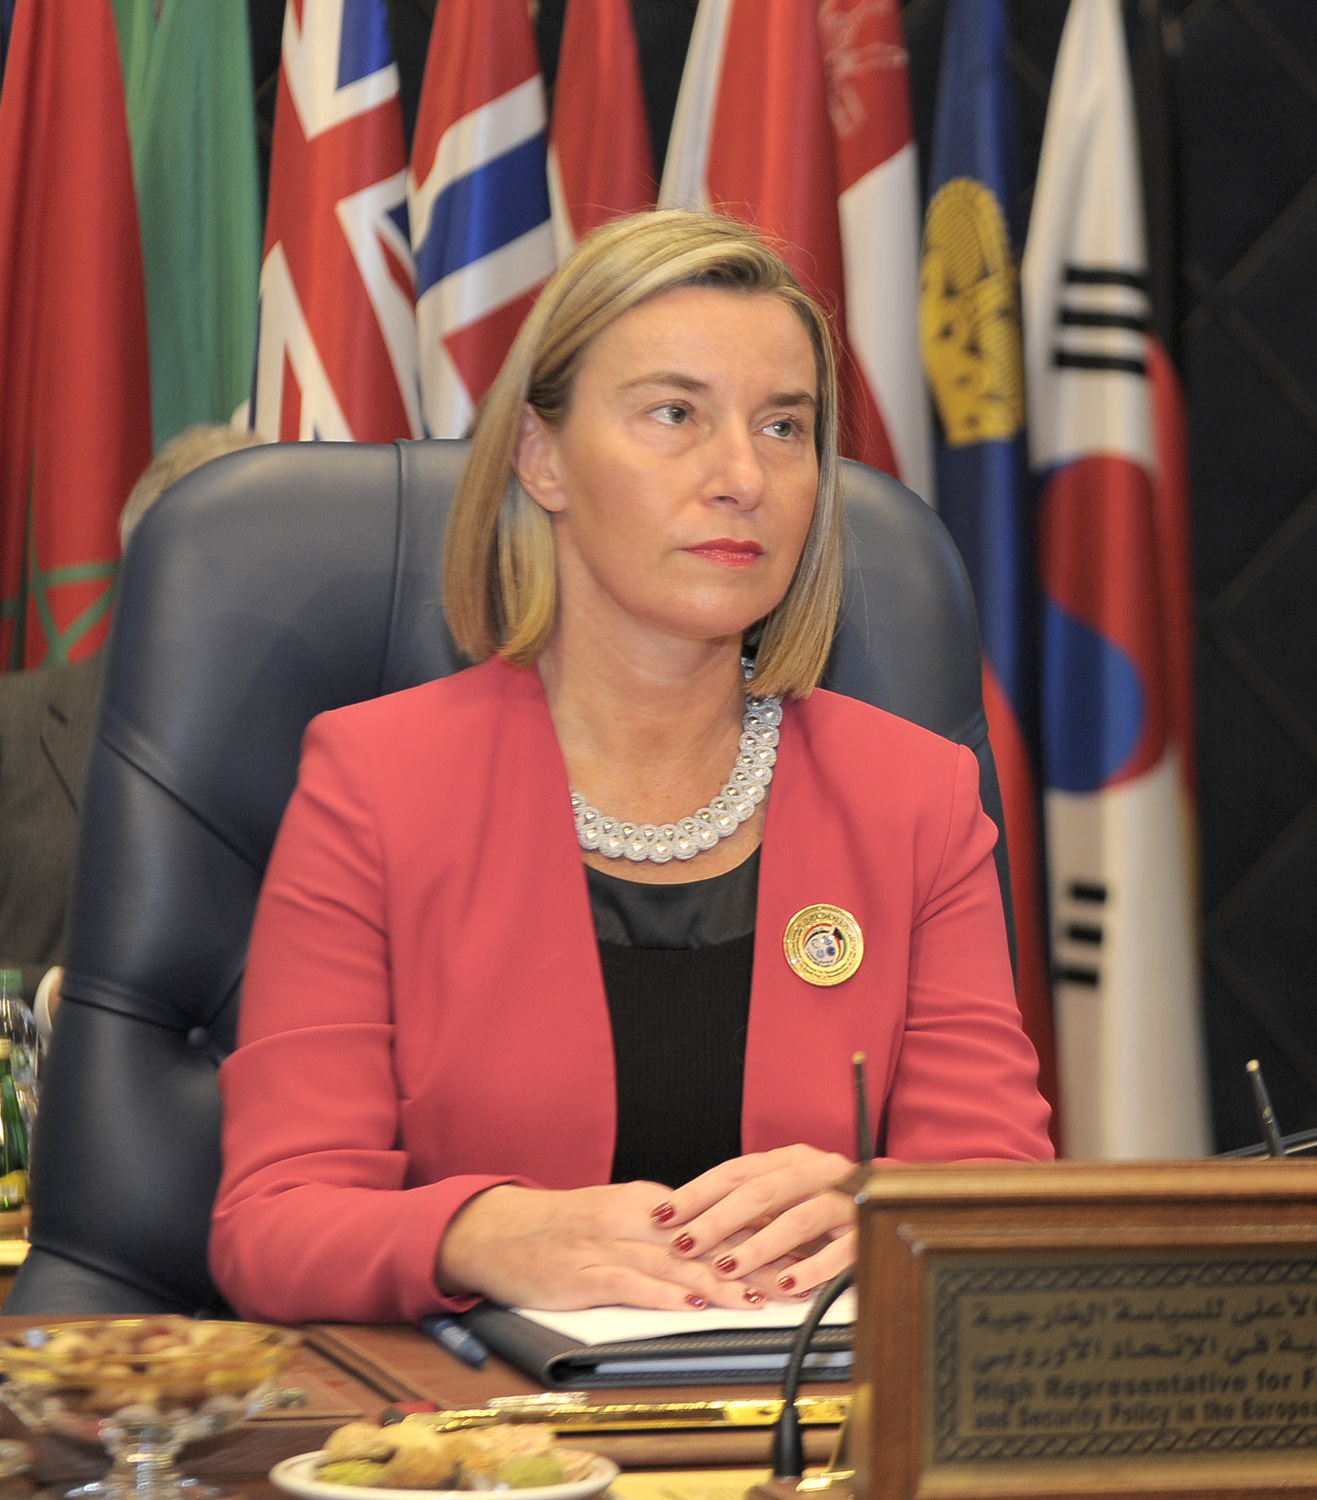 High Representative for Foreign Affairs and Security Policy Federica Mogherini during her speech at the "Kuwait International Conference for Reconstruction of Iraq,"